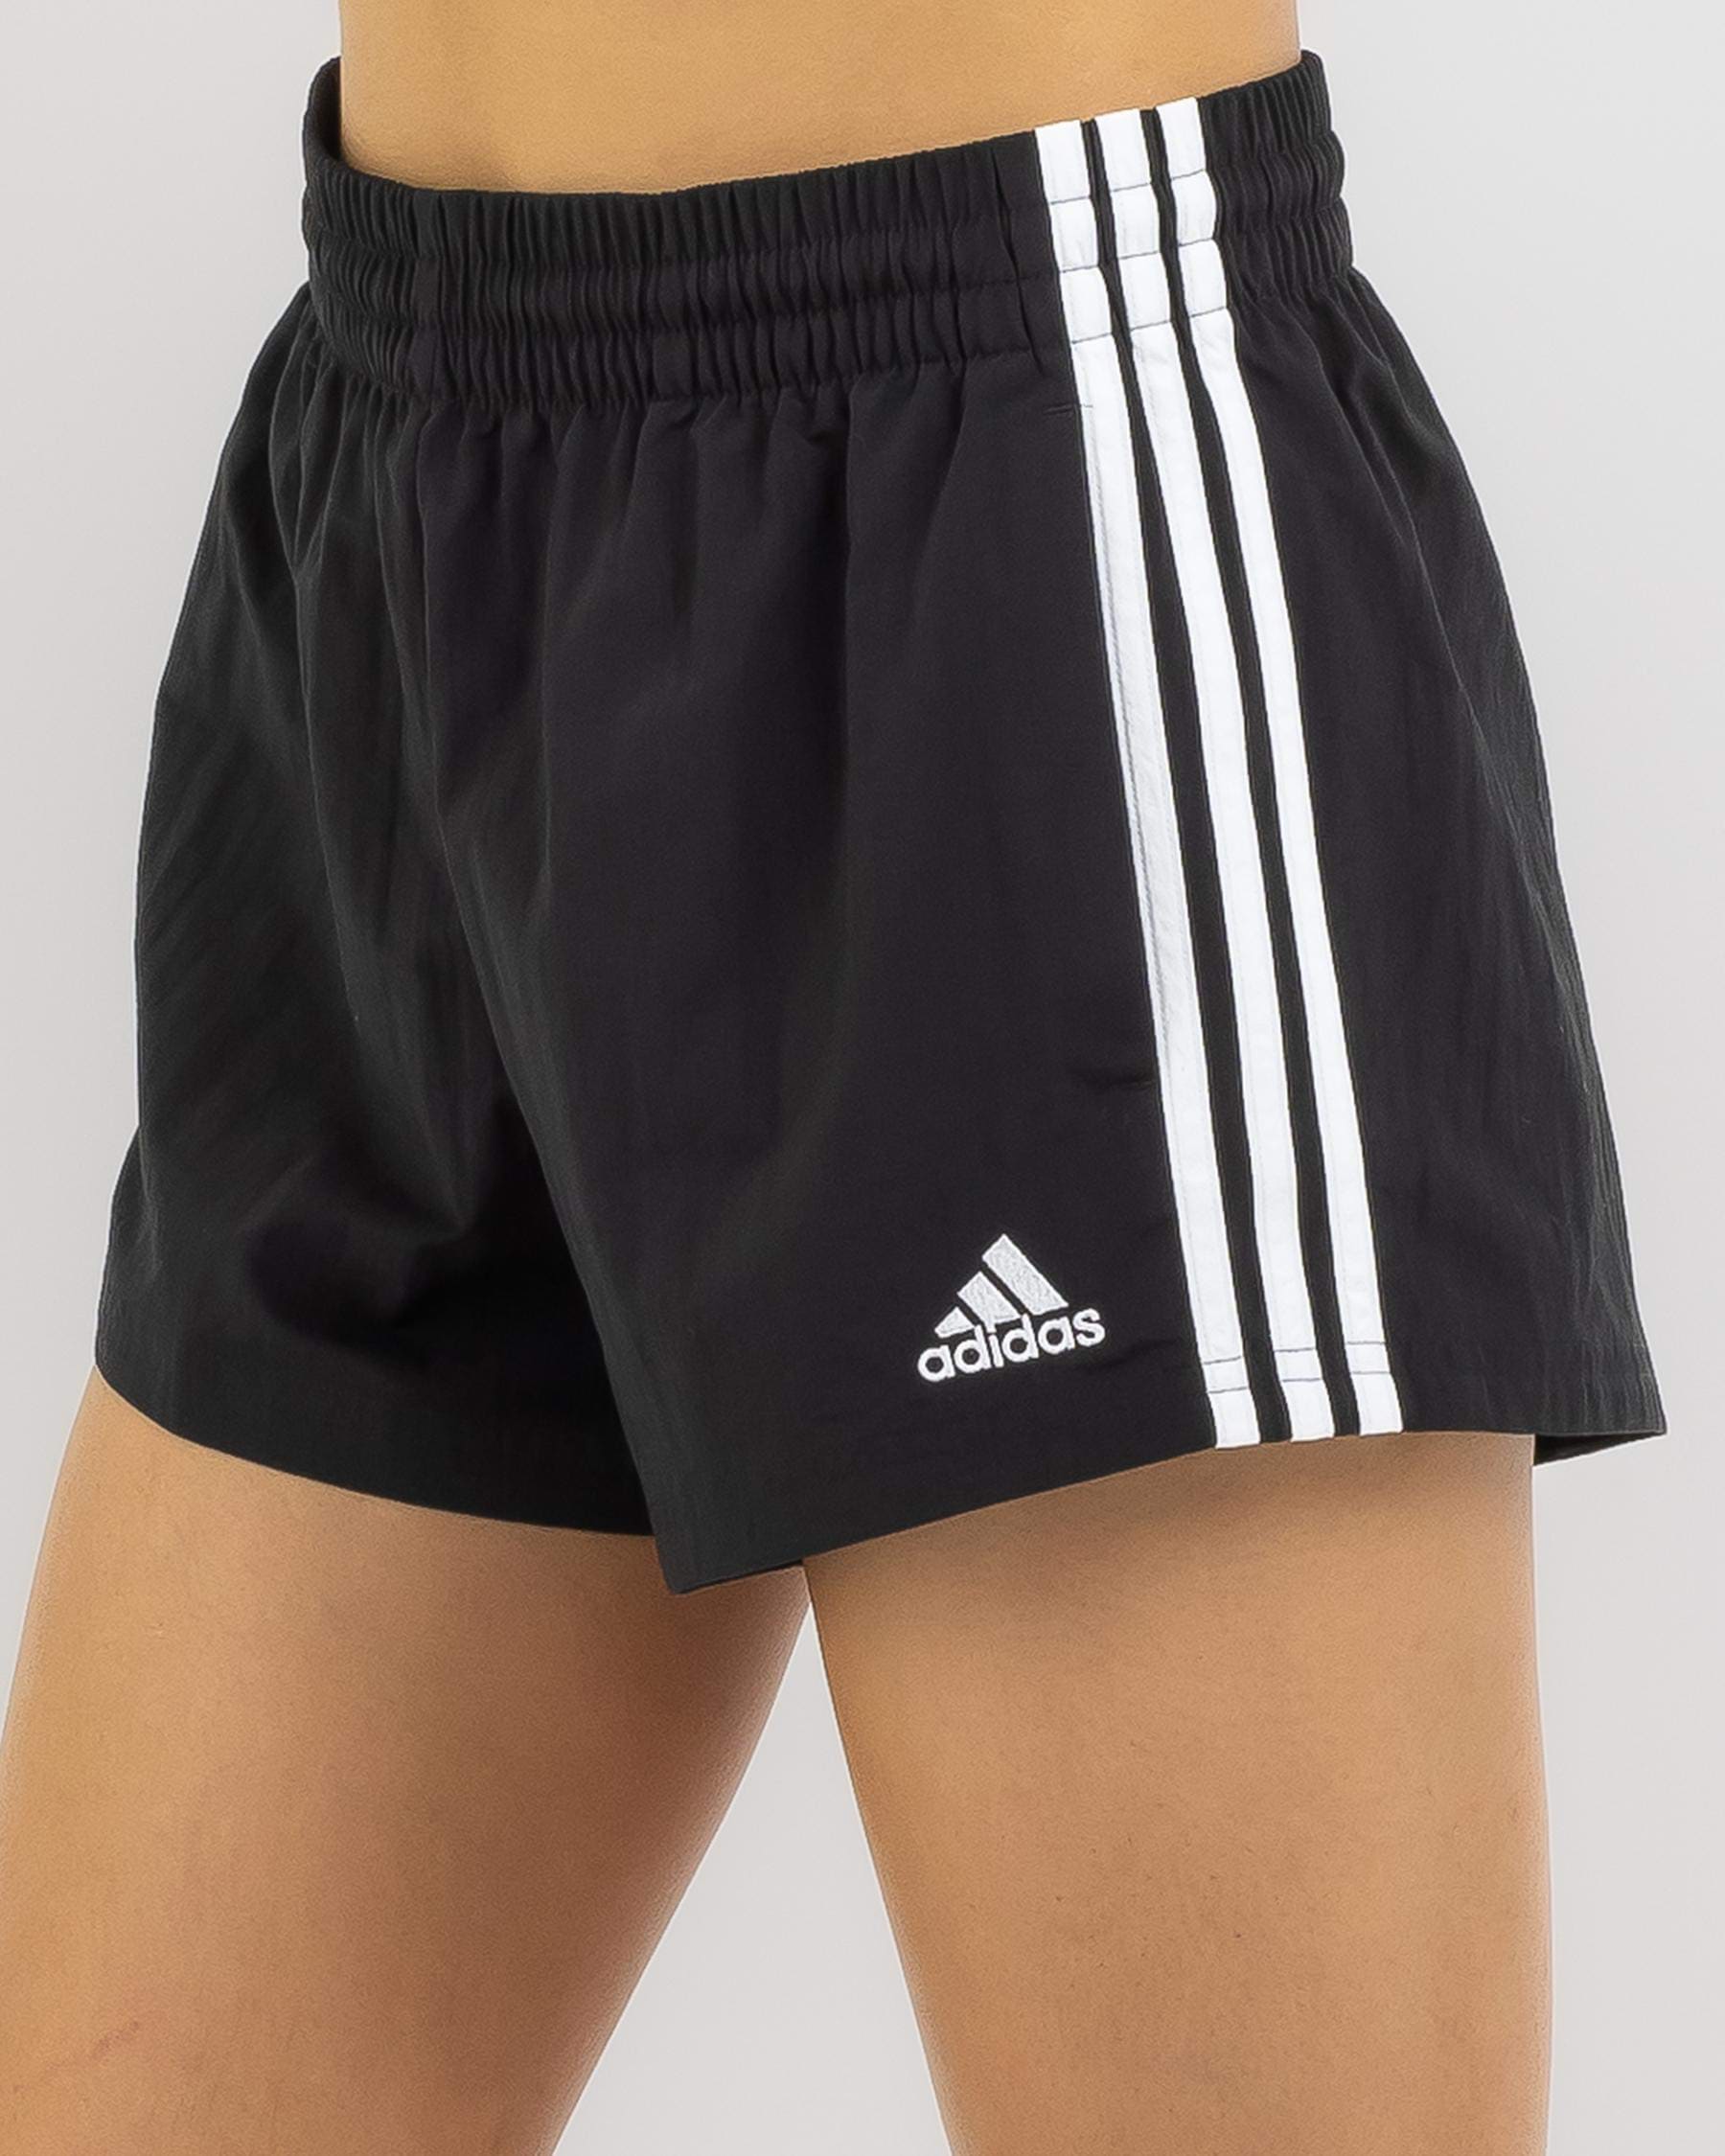 & Beach Returns In Essentials - Stripe United FREE* - Woven Black/white States 3 Shorts City Adidas Shipping Easy